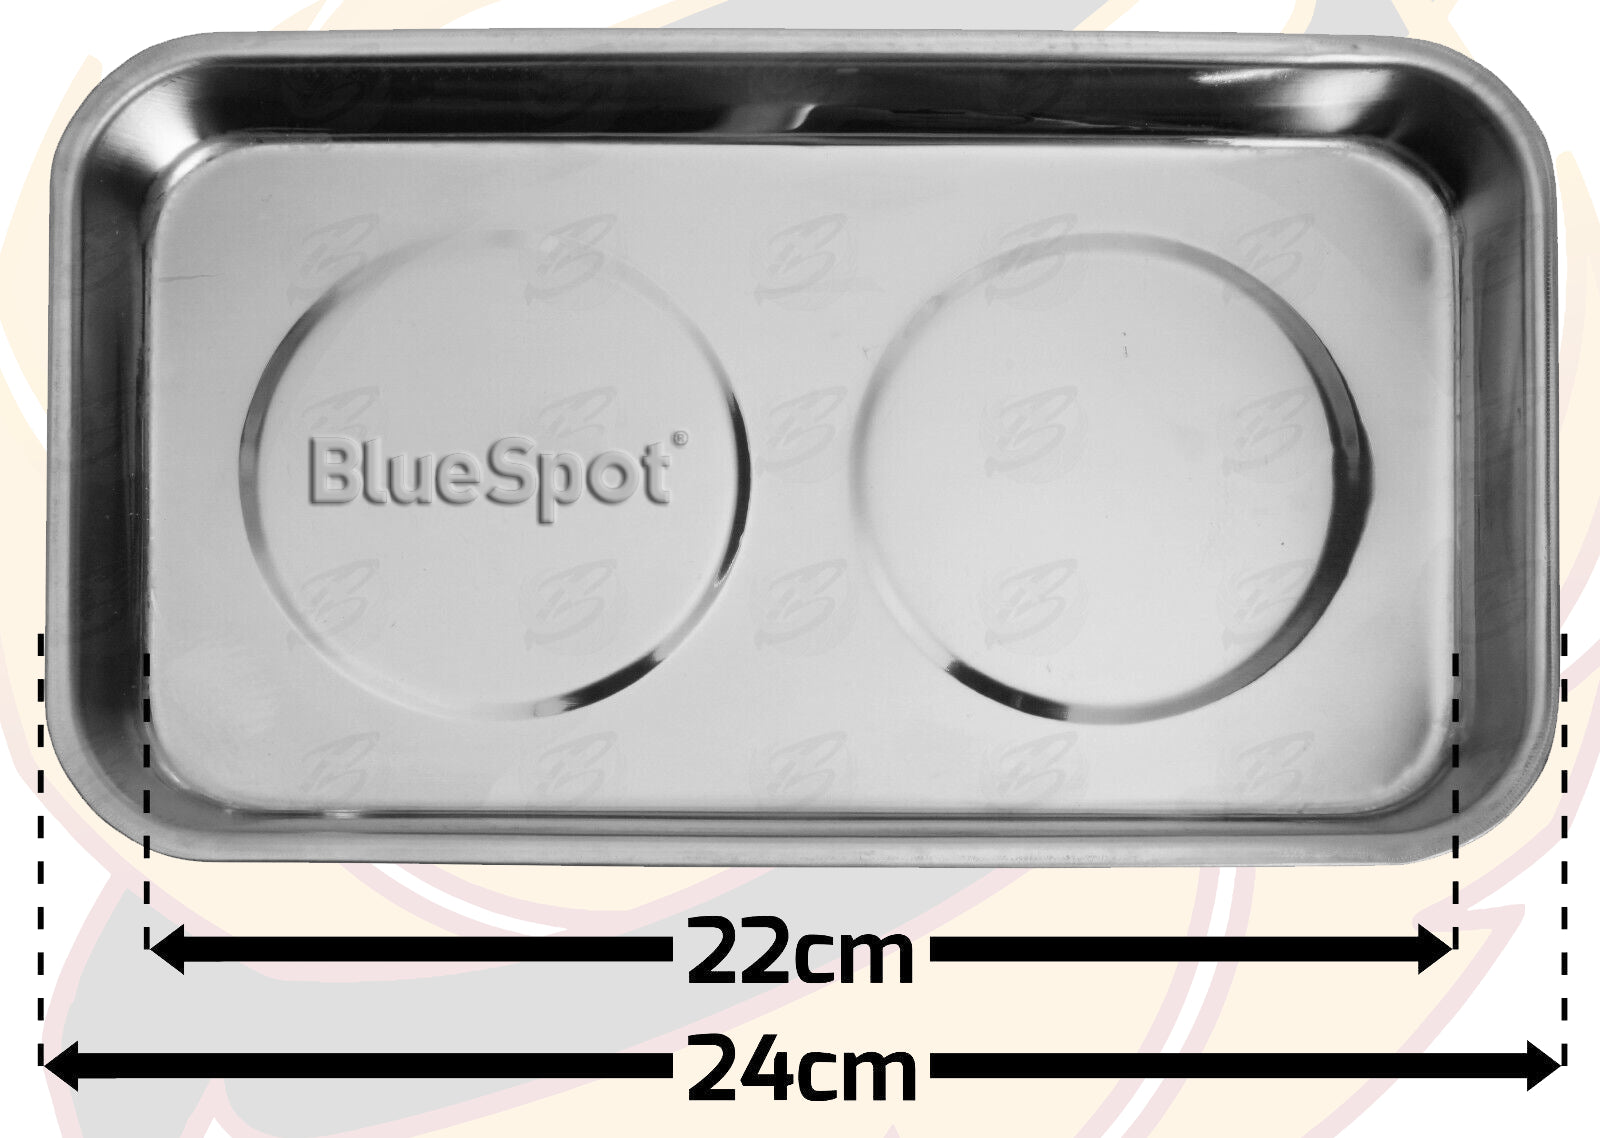 BLUESPOT 9" STAINLESS STEEL DOUBLE MAGNETIC PARTS TRAY